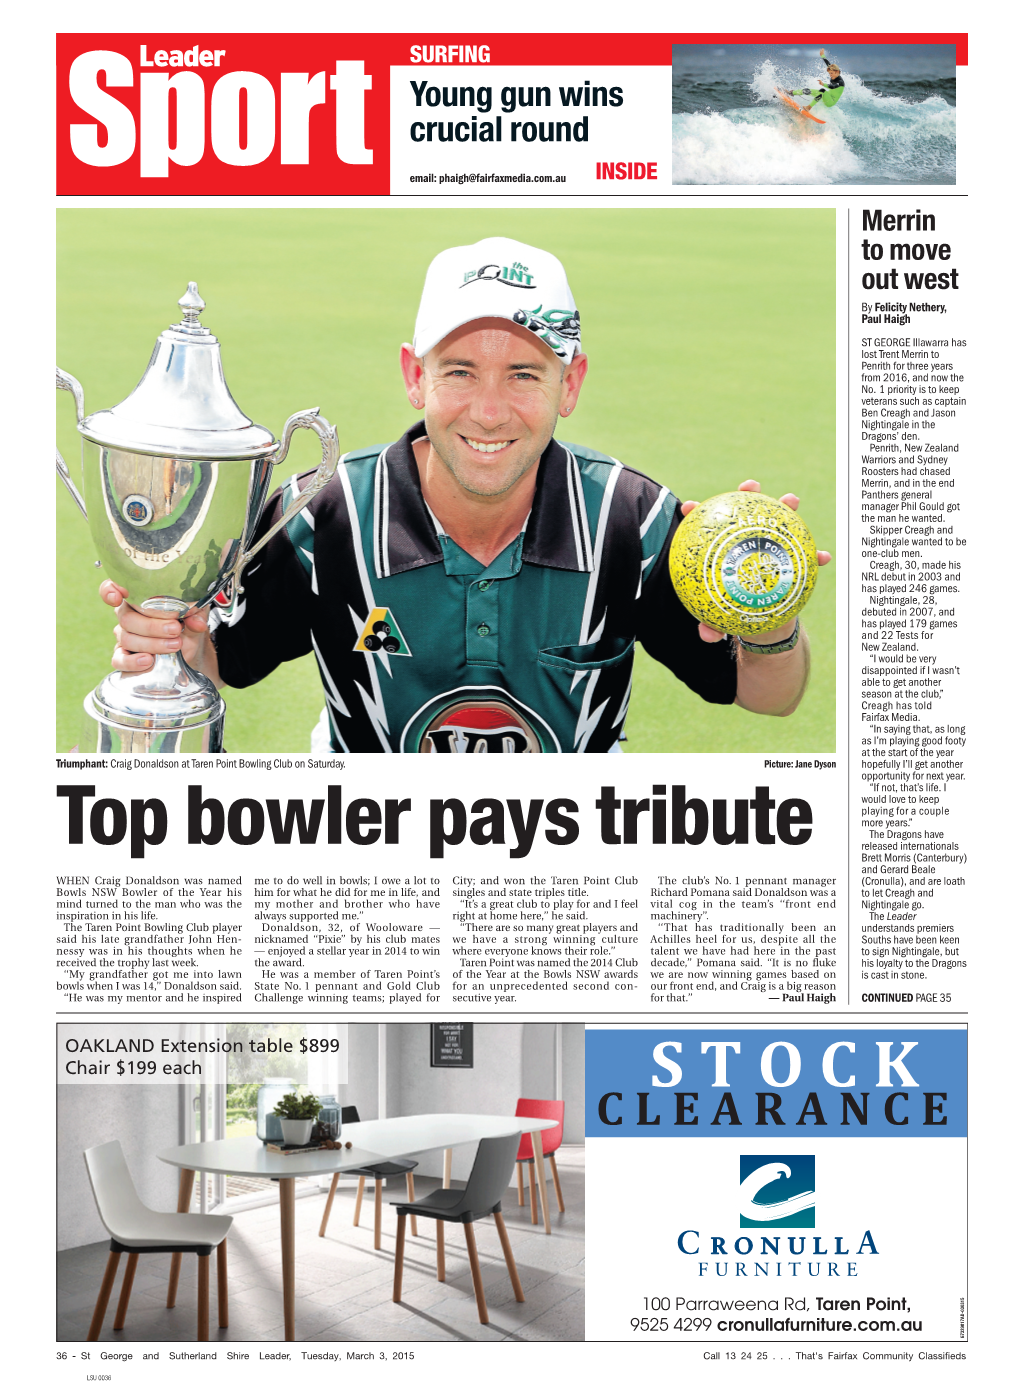 Top Bowler Pays Tribute